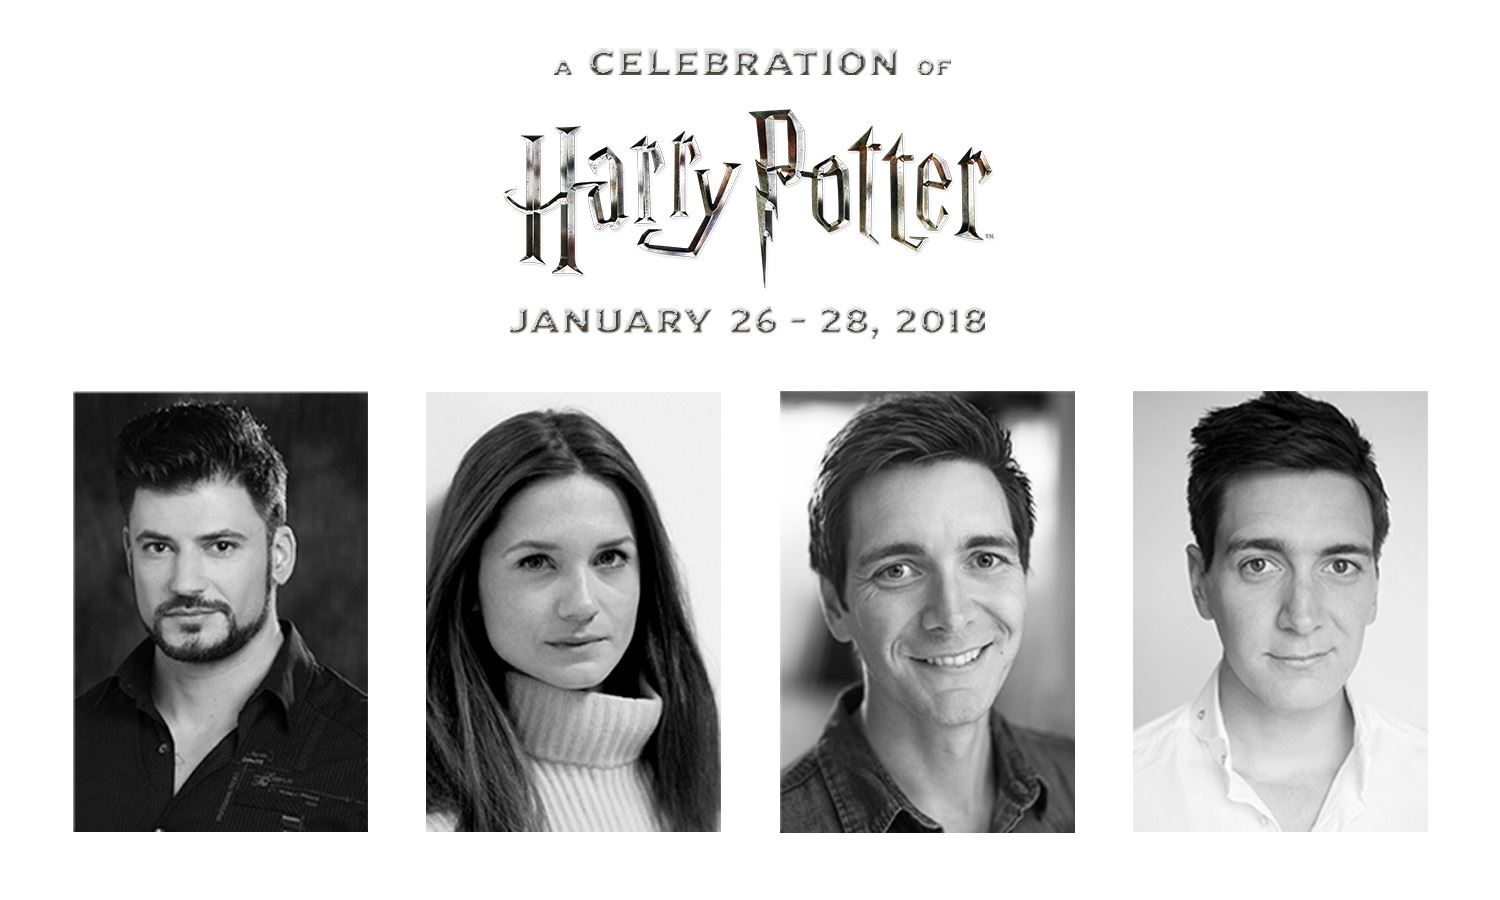 Universal's Celebration of Harry Potter Adds Bonnie Wright